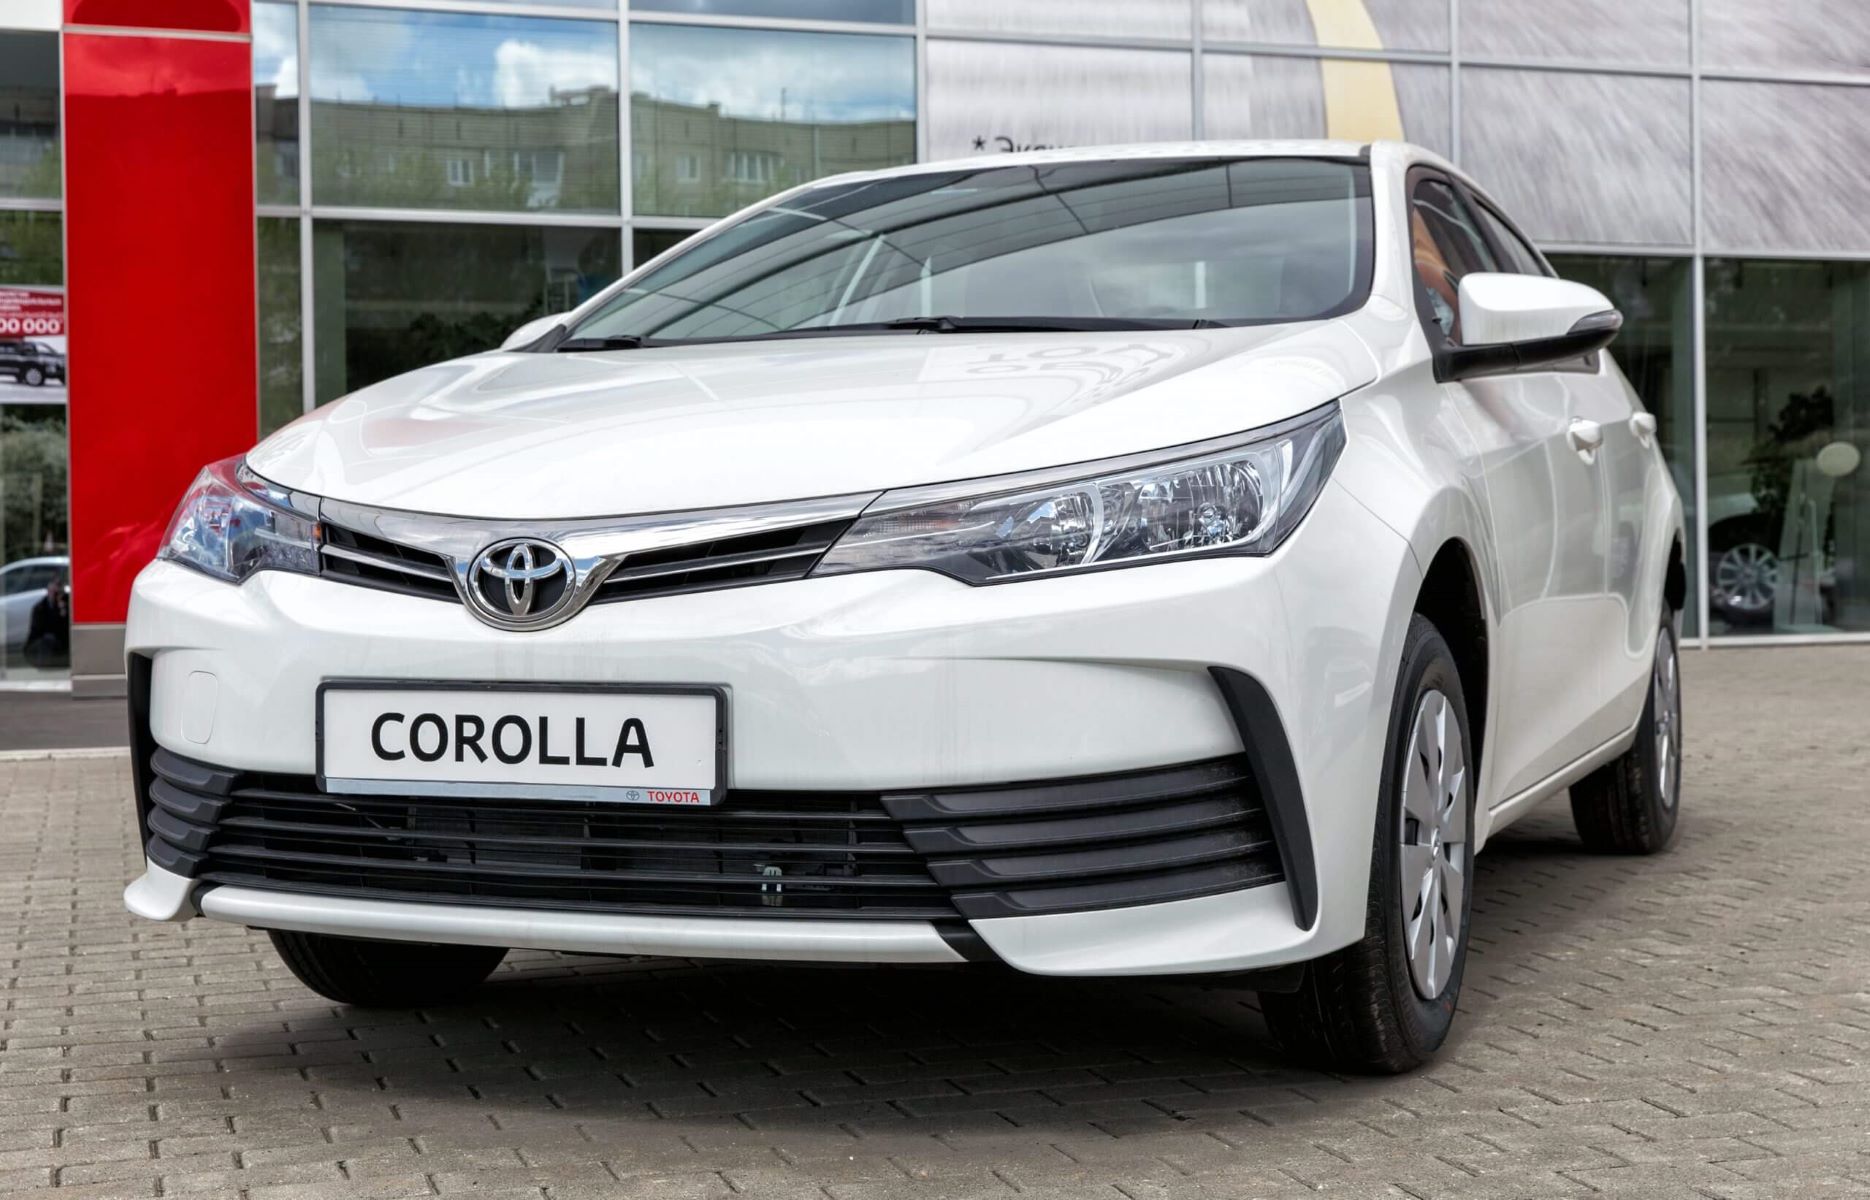 The Ultimate Guide: Best Year Of Toyota Corolla To Buy And How Long It Lasts!